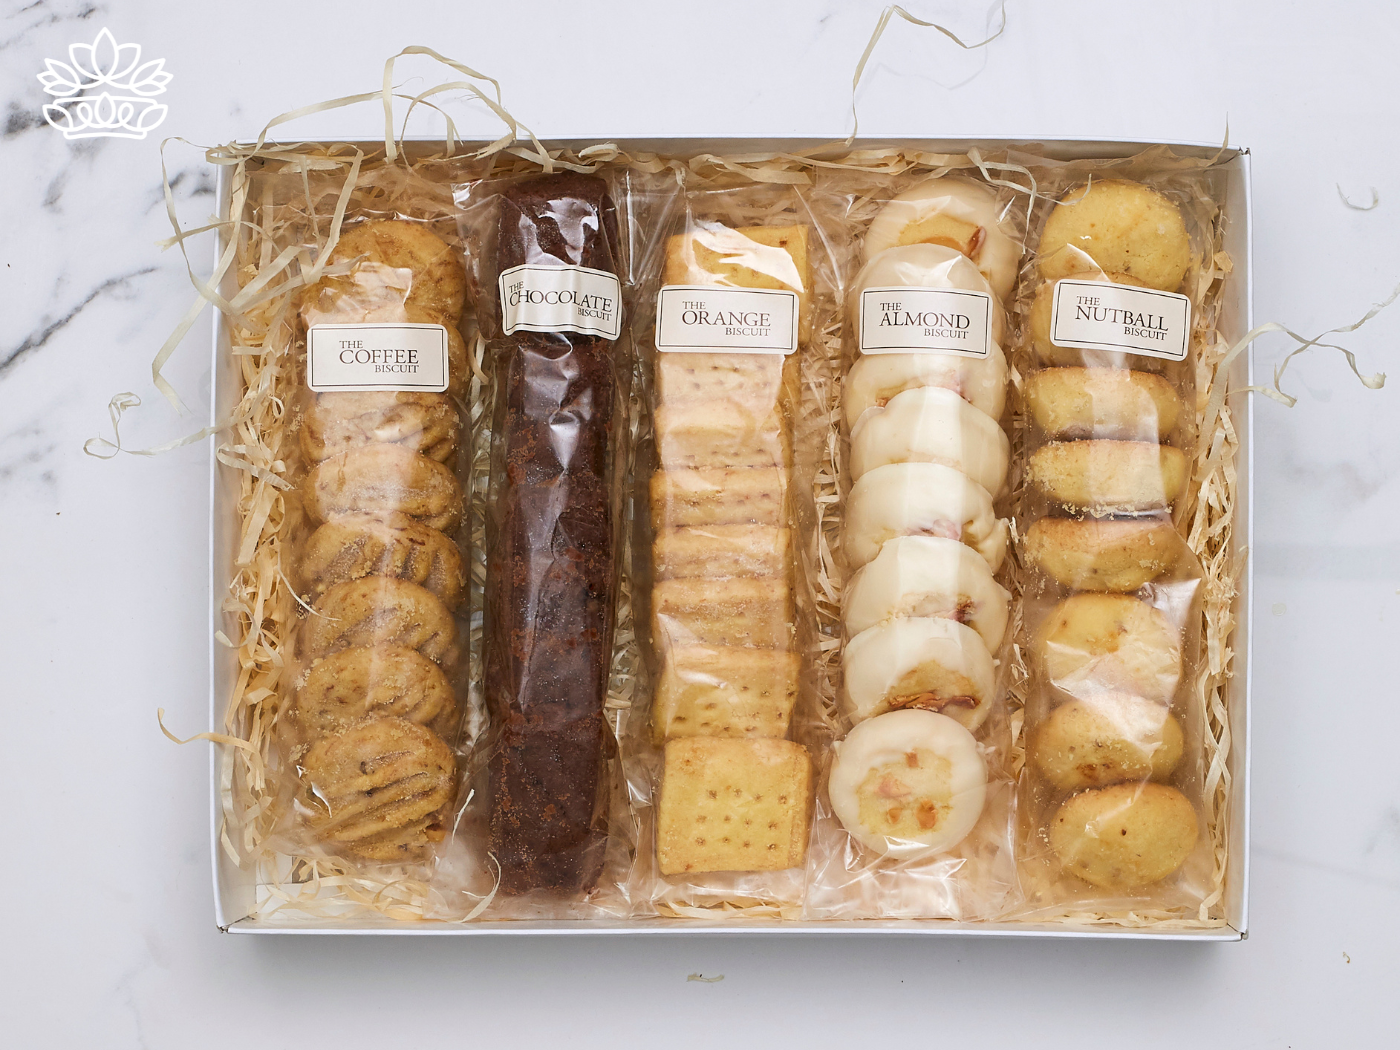 A curated selection of biscuits in various flavours, including coffee, chocolate, orange, almond, and nutball, neatly arranged in a gift box on a bed of straw. Fabulous Flowers and Gifts. Gift Boxes for Boyfriend. Delivered with Heart.